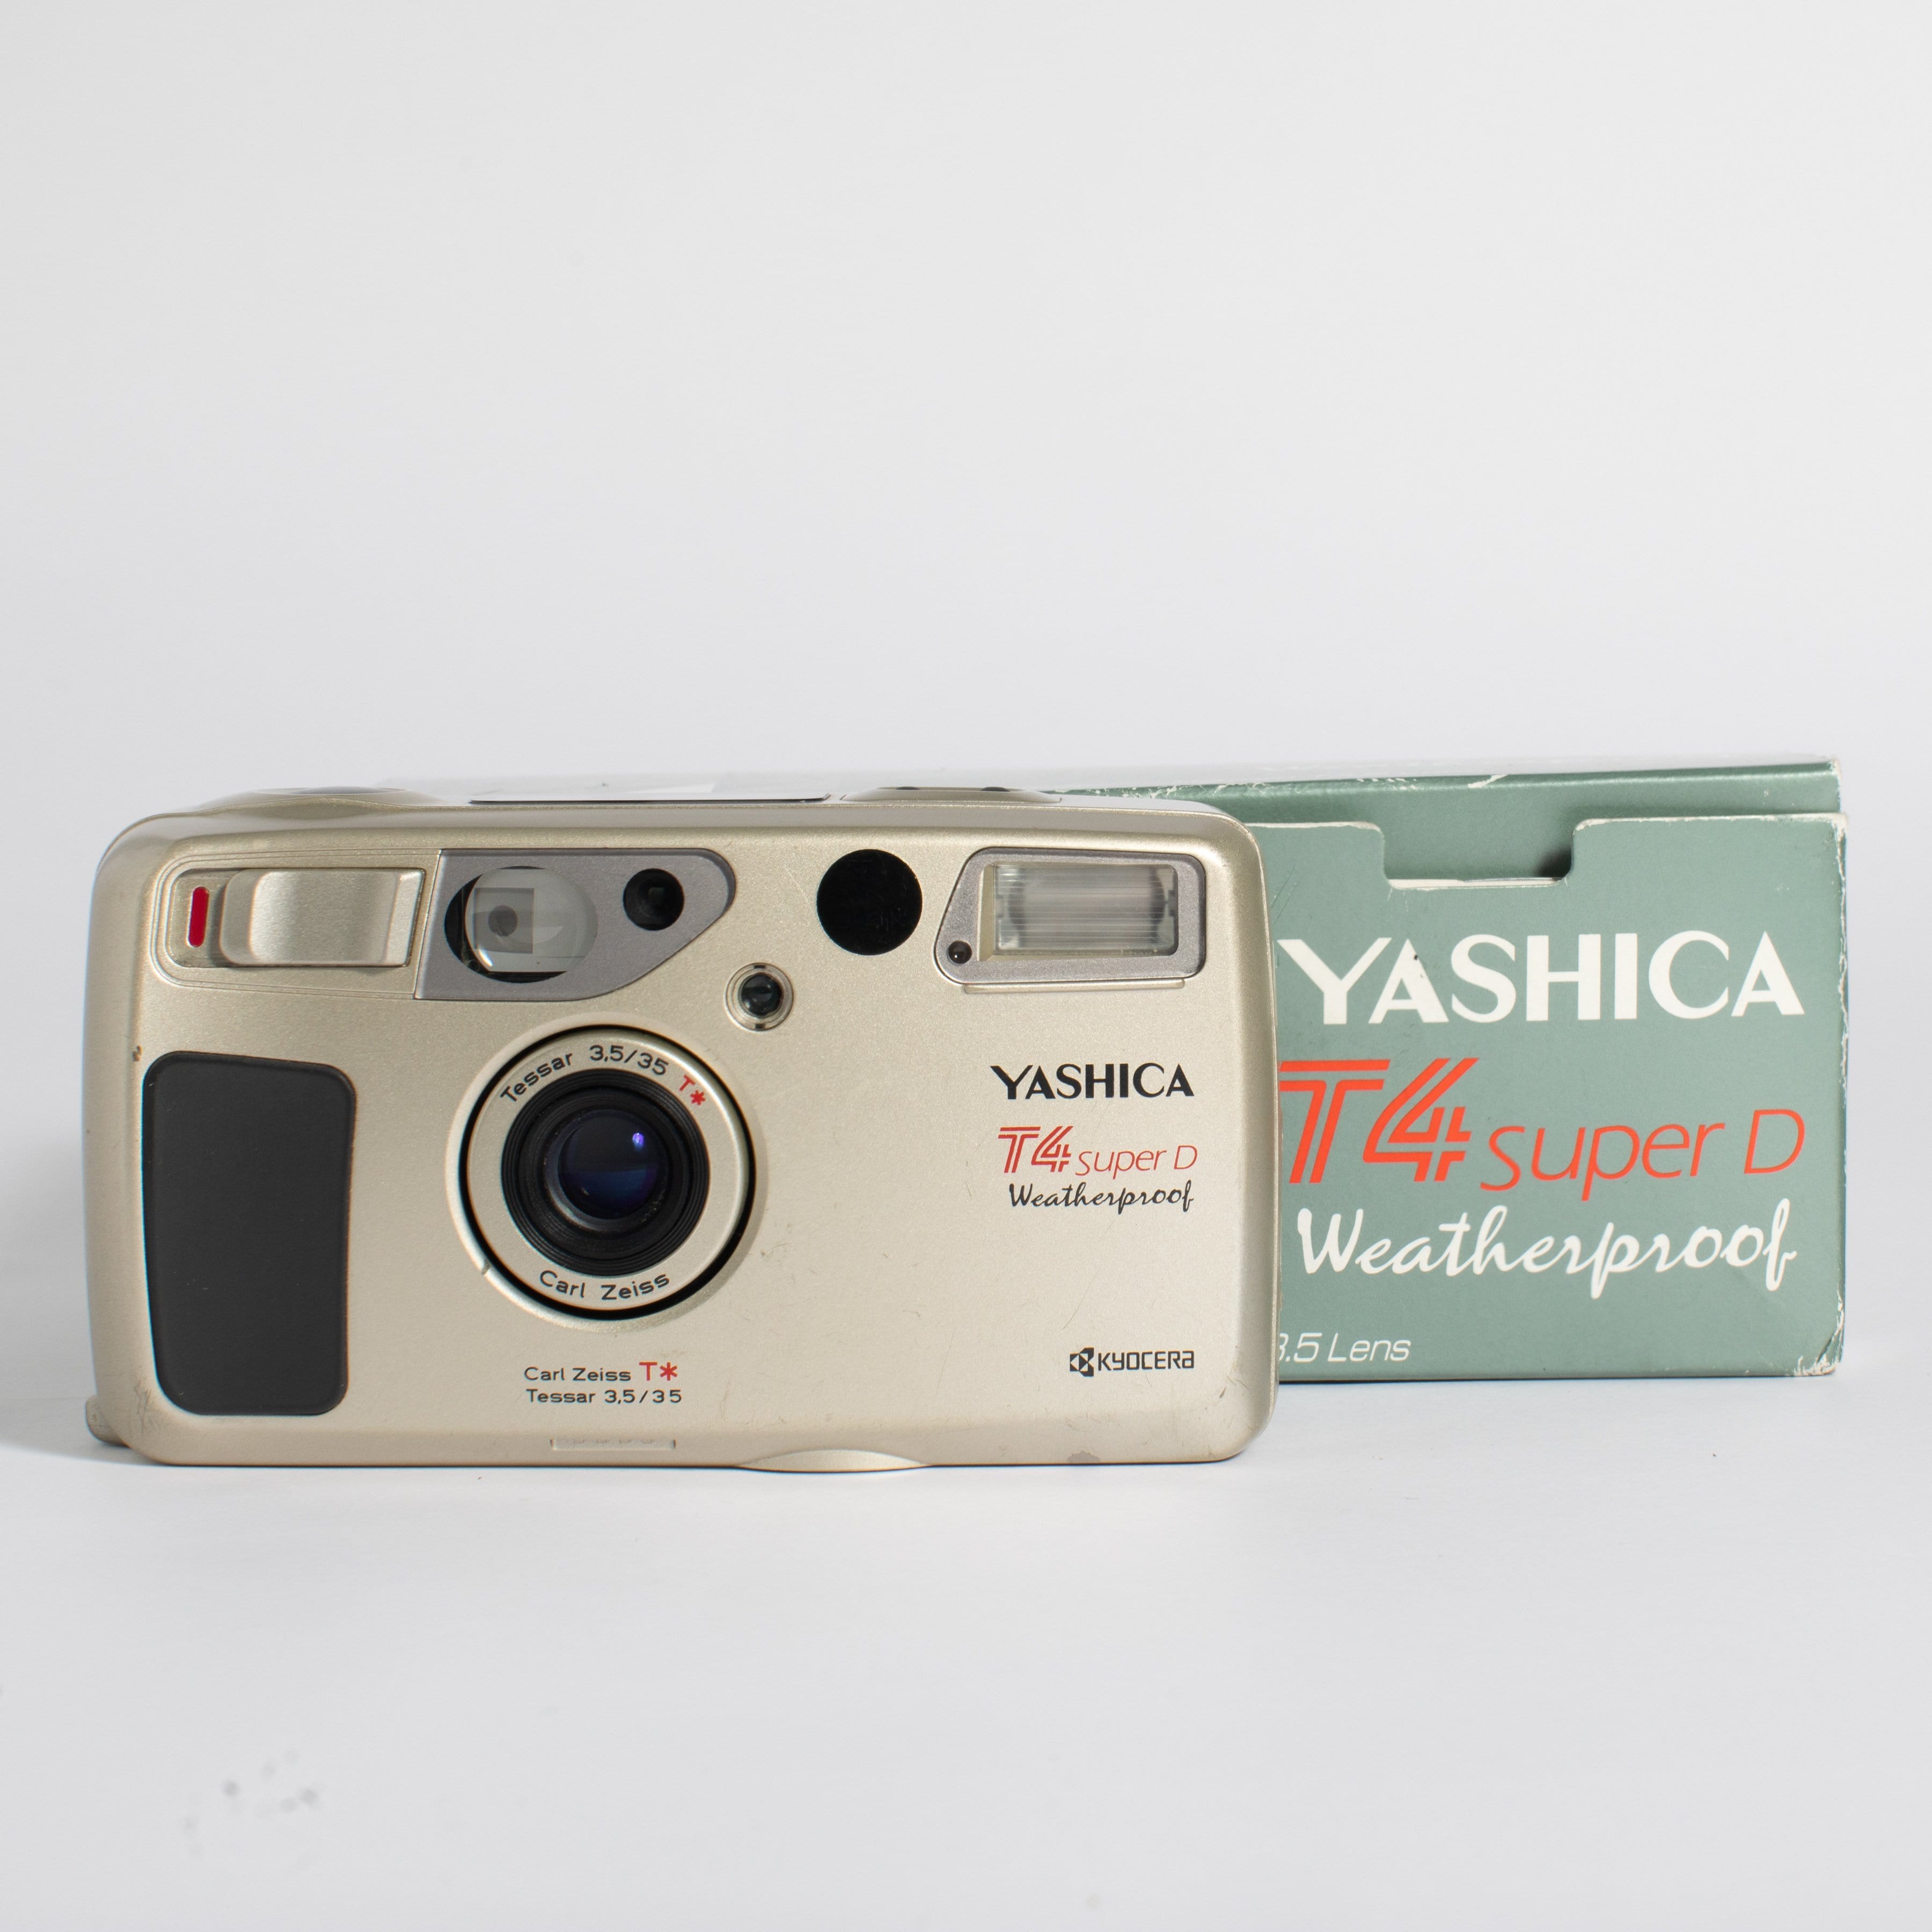 YASHICA T4 SuperD